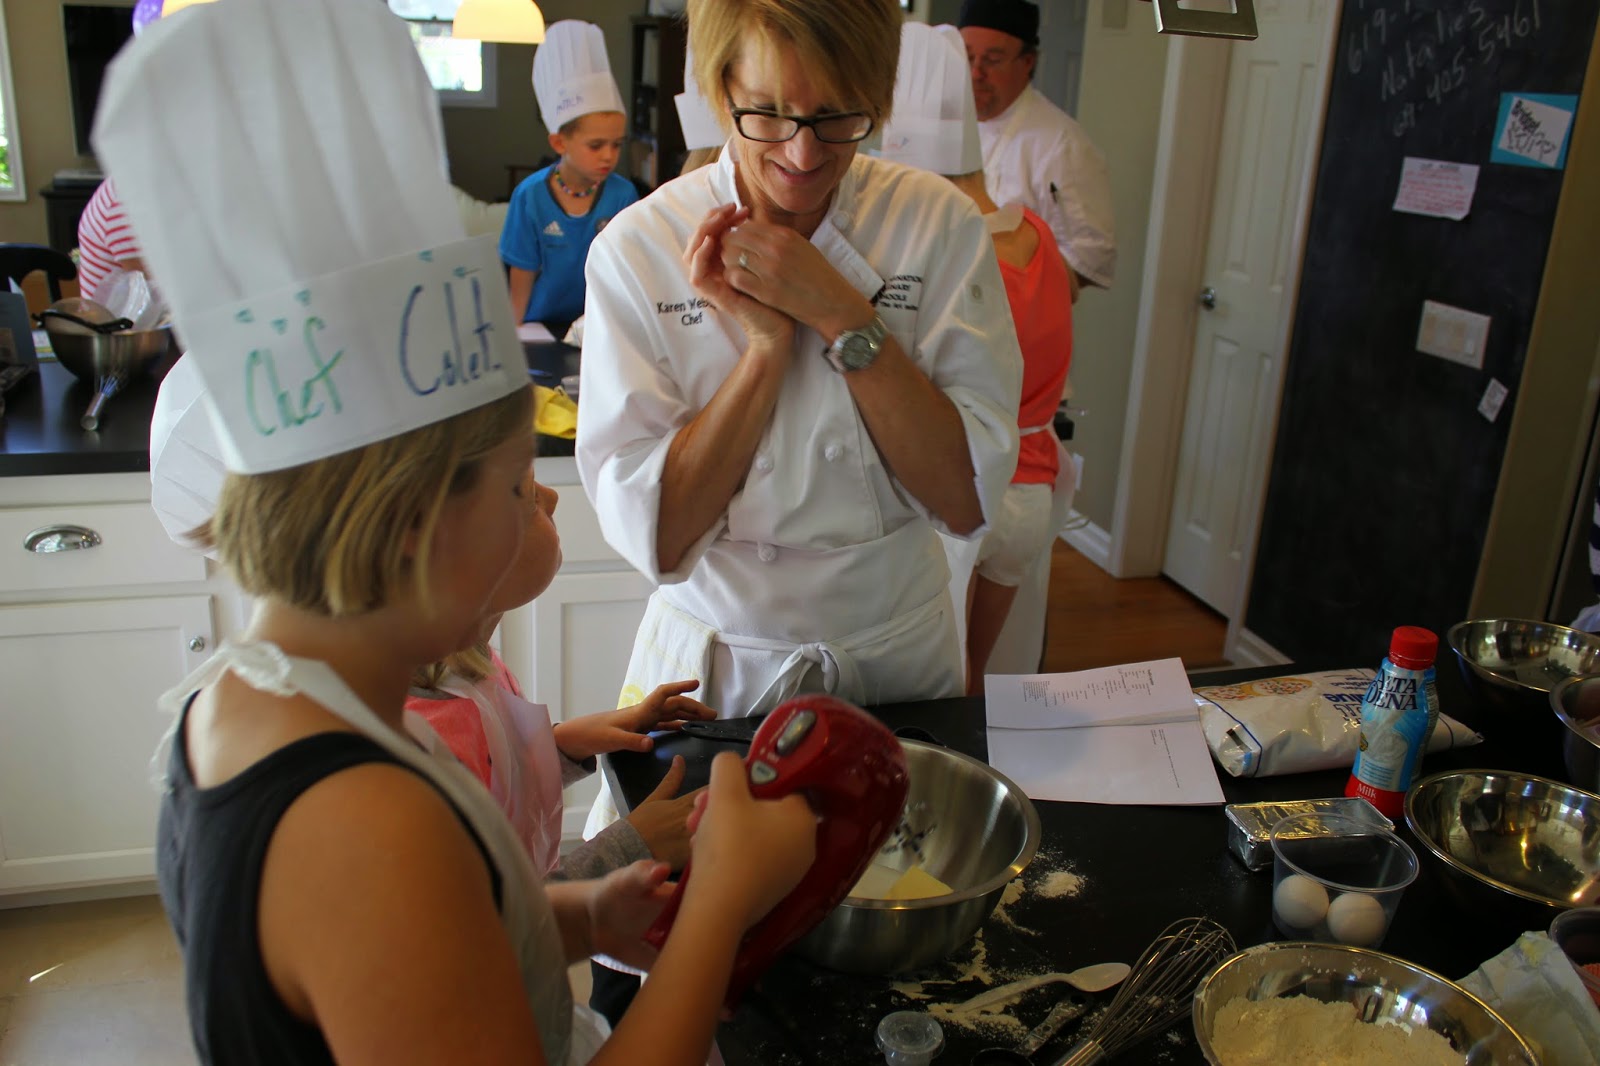 Kids Cooking Class Summer Camp in San Marcos, CA! Jr Chef Restaurant Theme Camp